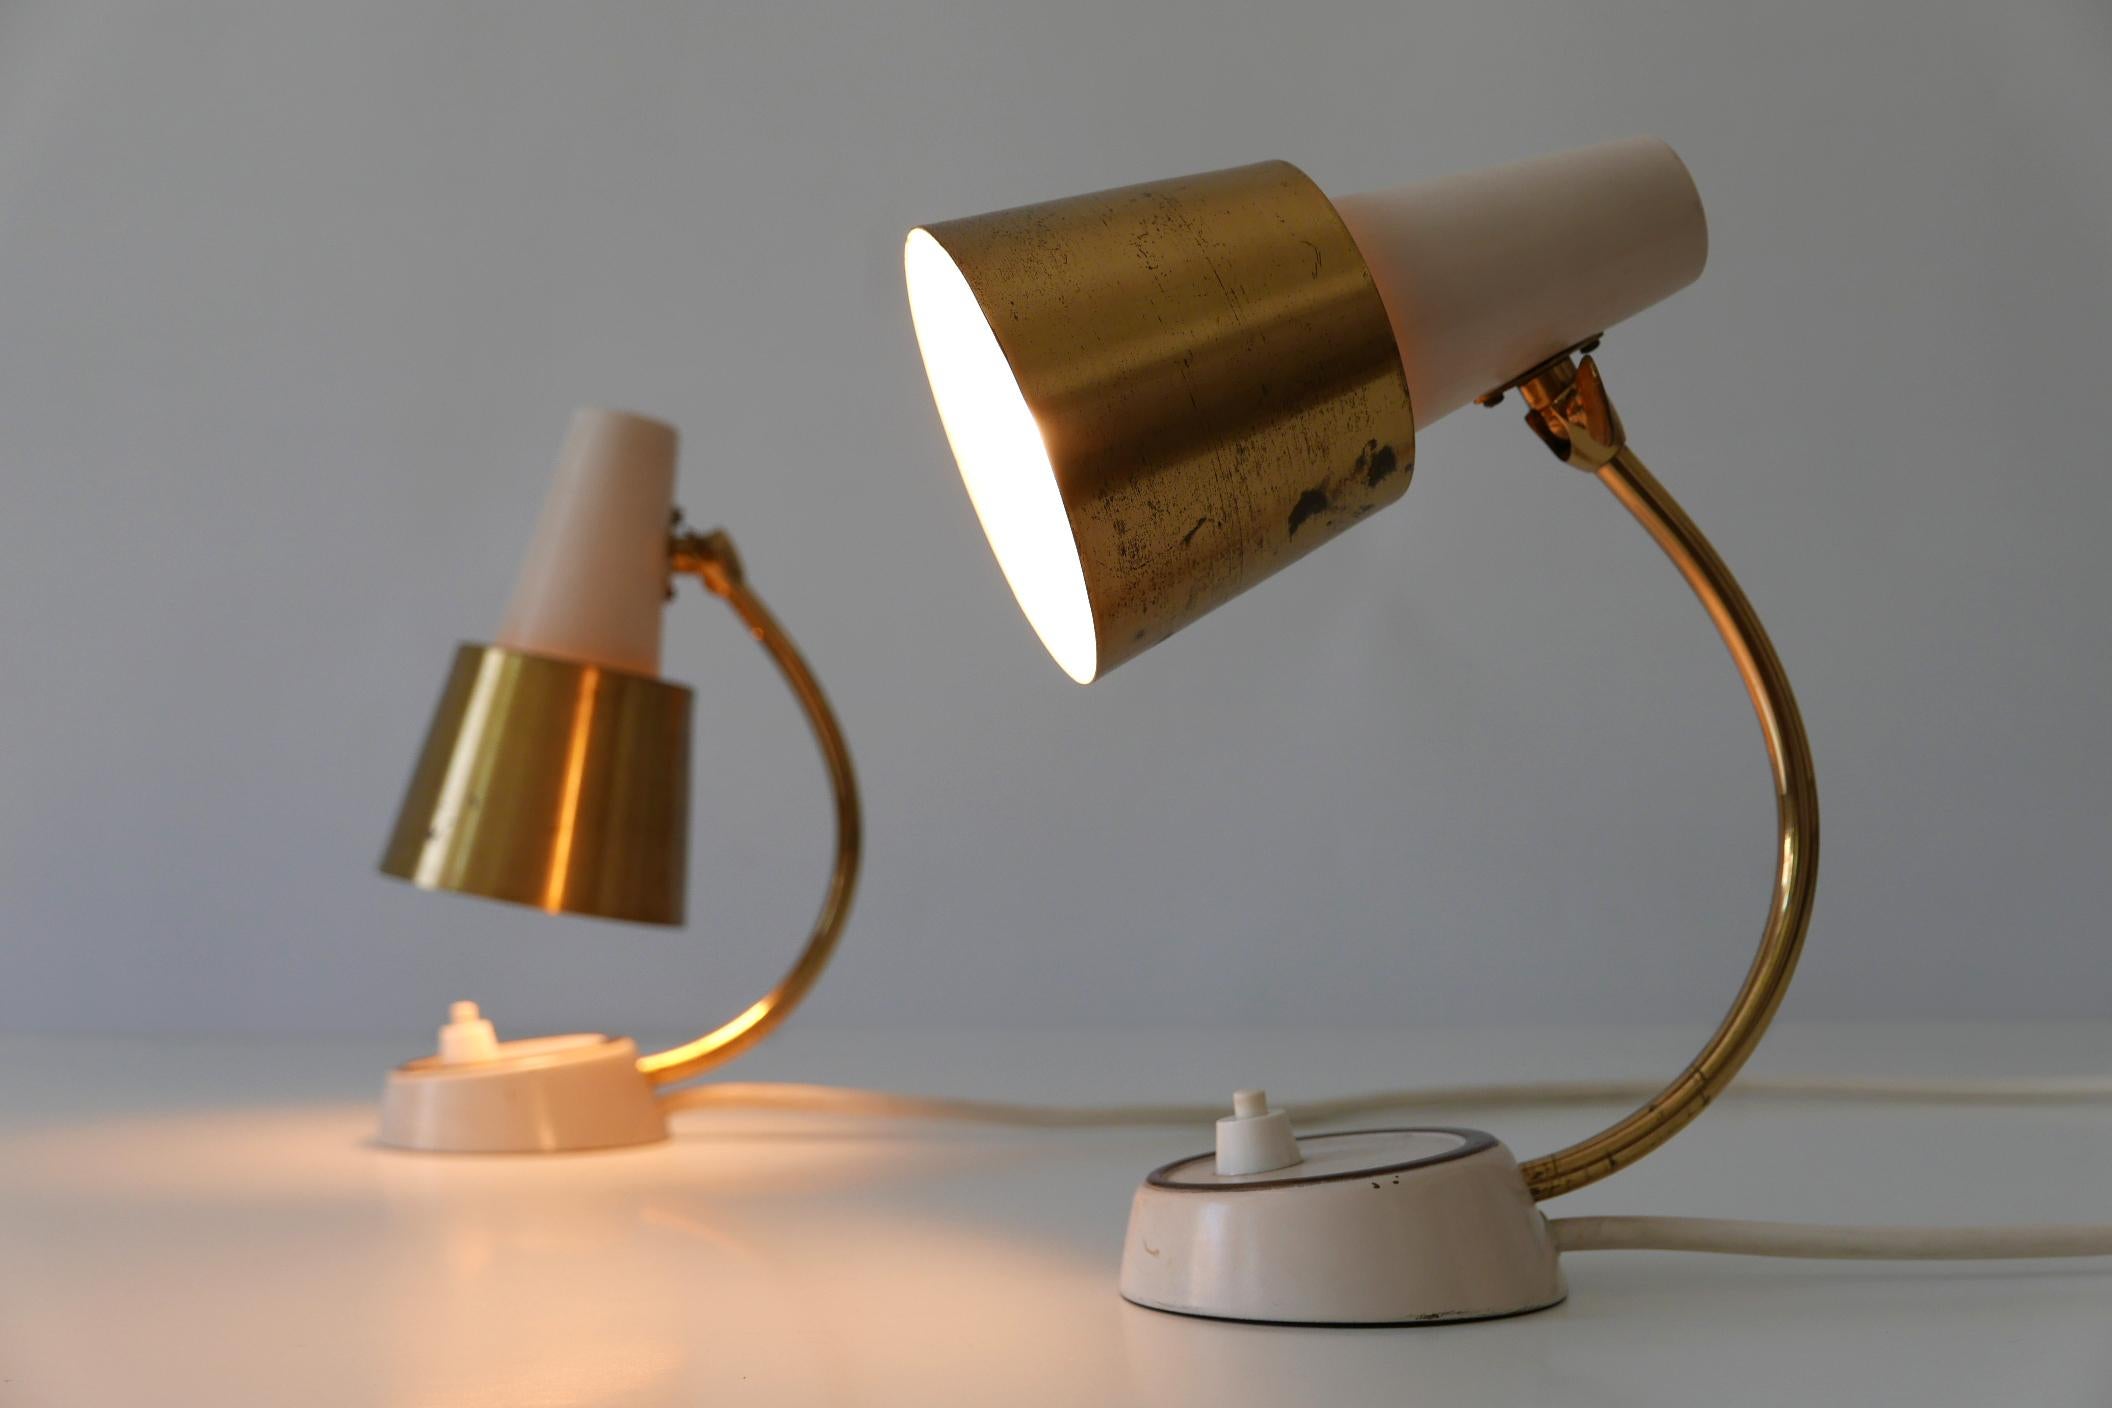 Set of Two Mid-Century Modern Bedside Table Lamps or Wall Lights, 1950s, Germany For Sale 2